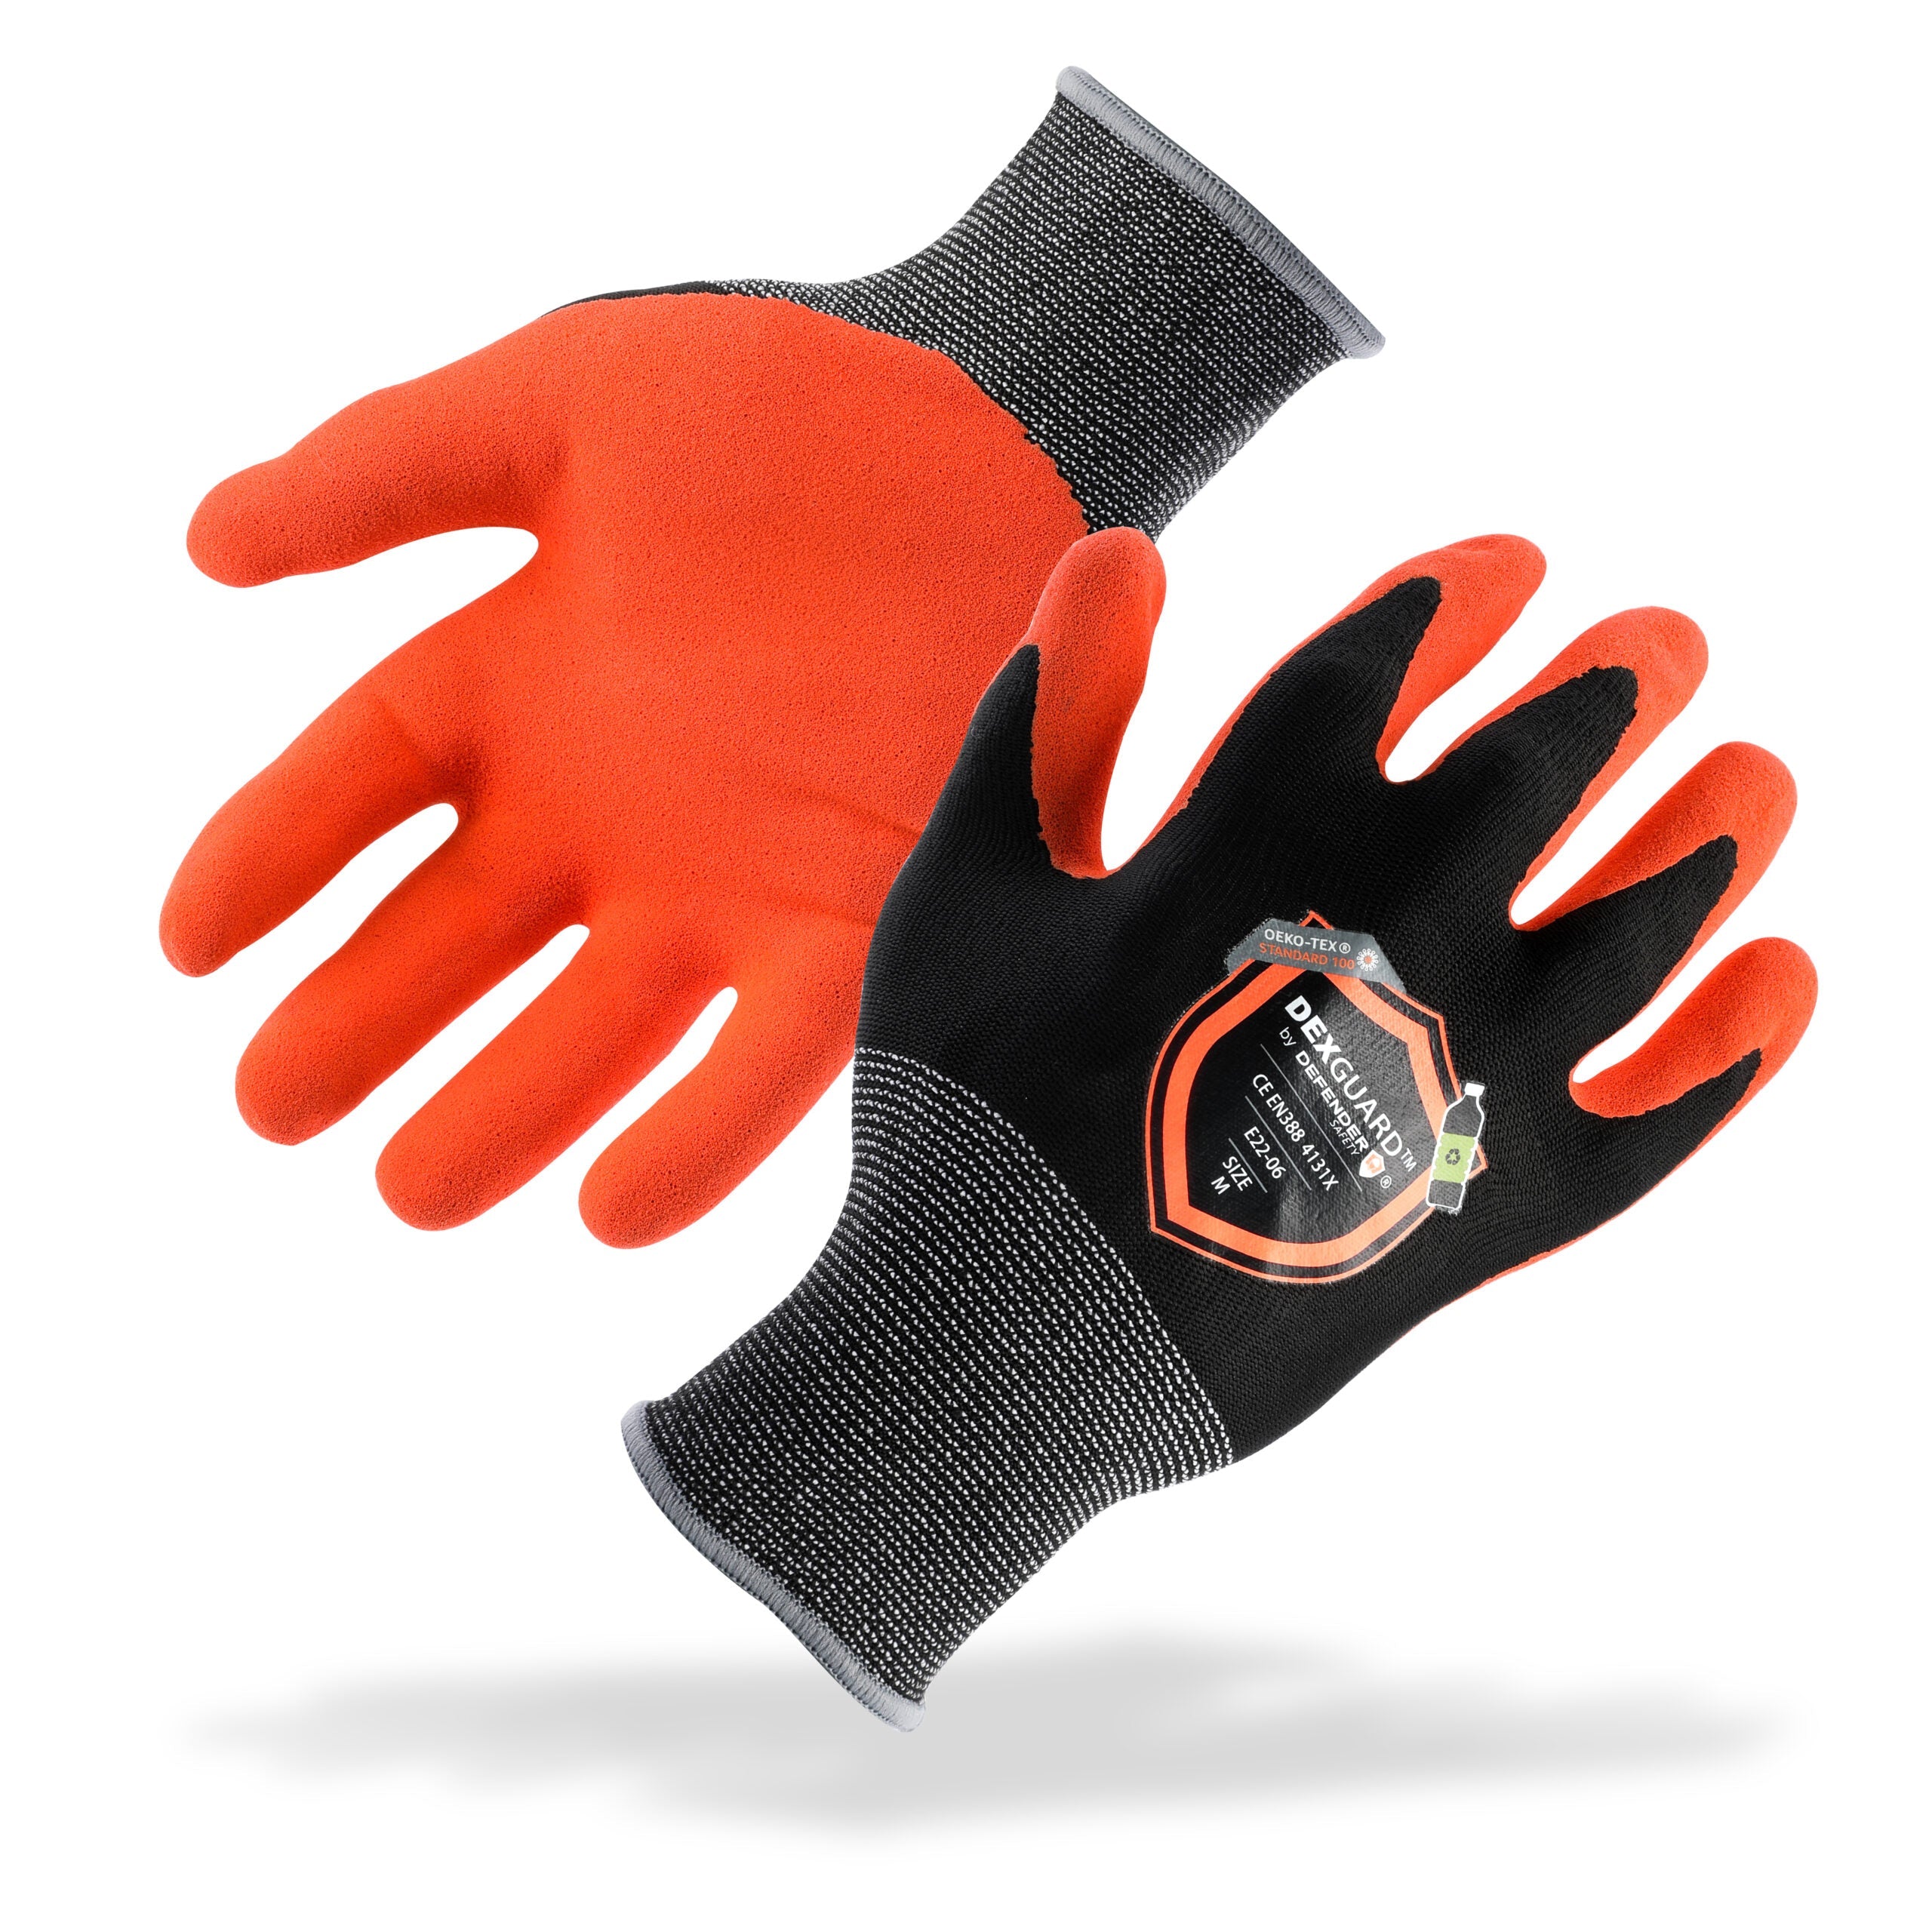 DEXGUARD™ General Purpose Recycled Gloves, Touch Screen Compatible, Abrasion Resistant Level 4, Textured Nitrile Coating - Defender Safety